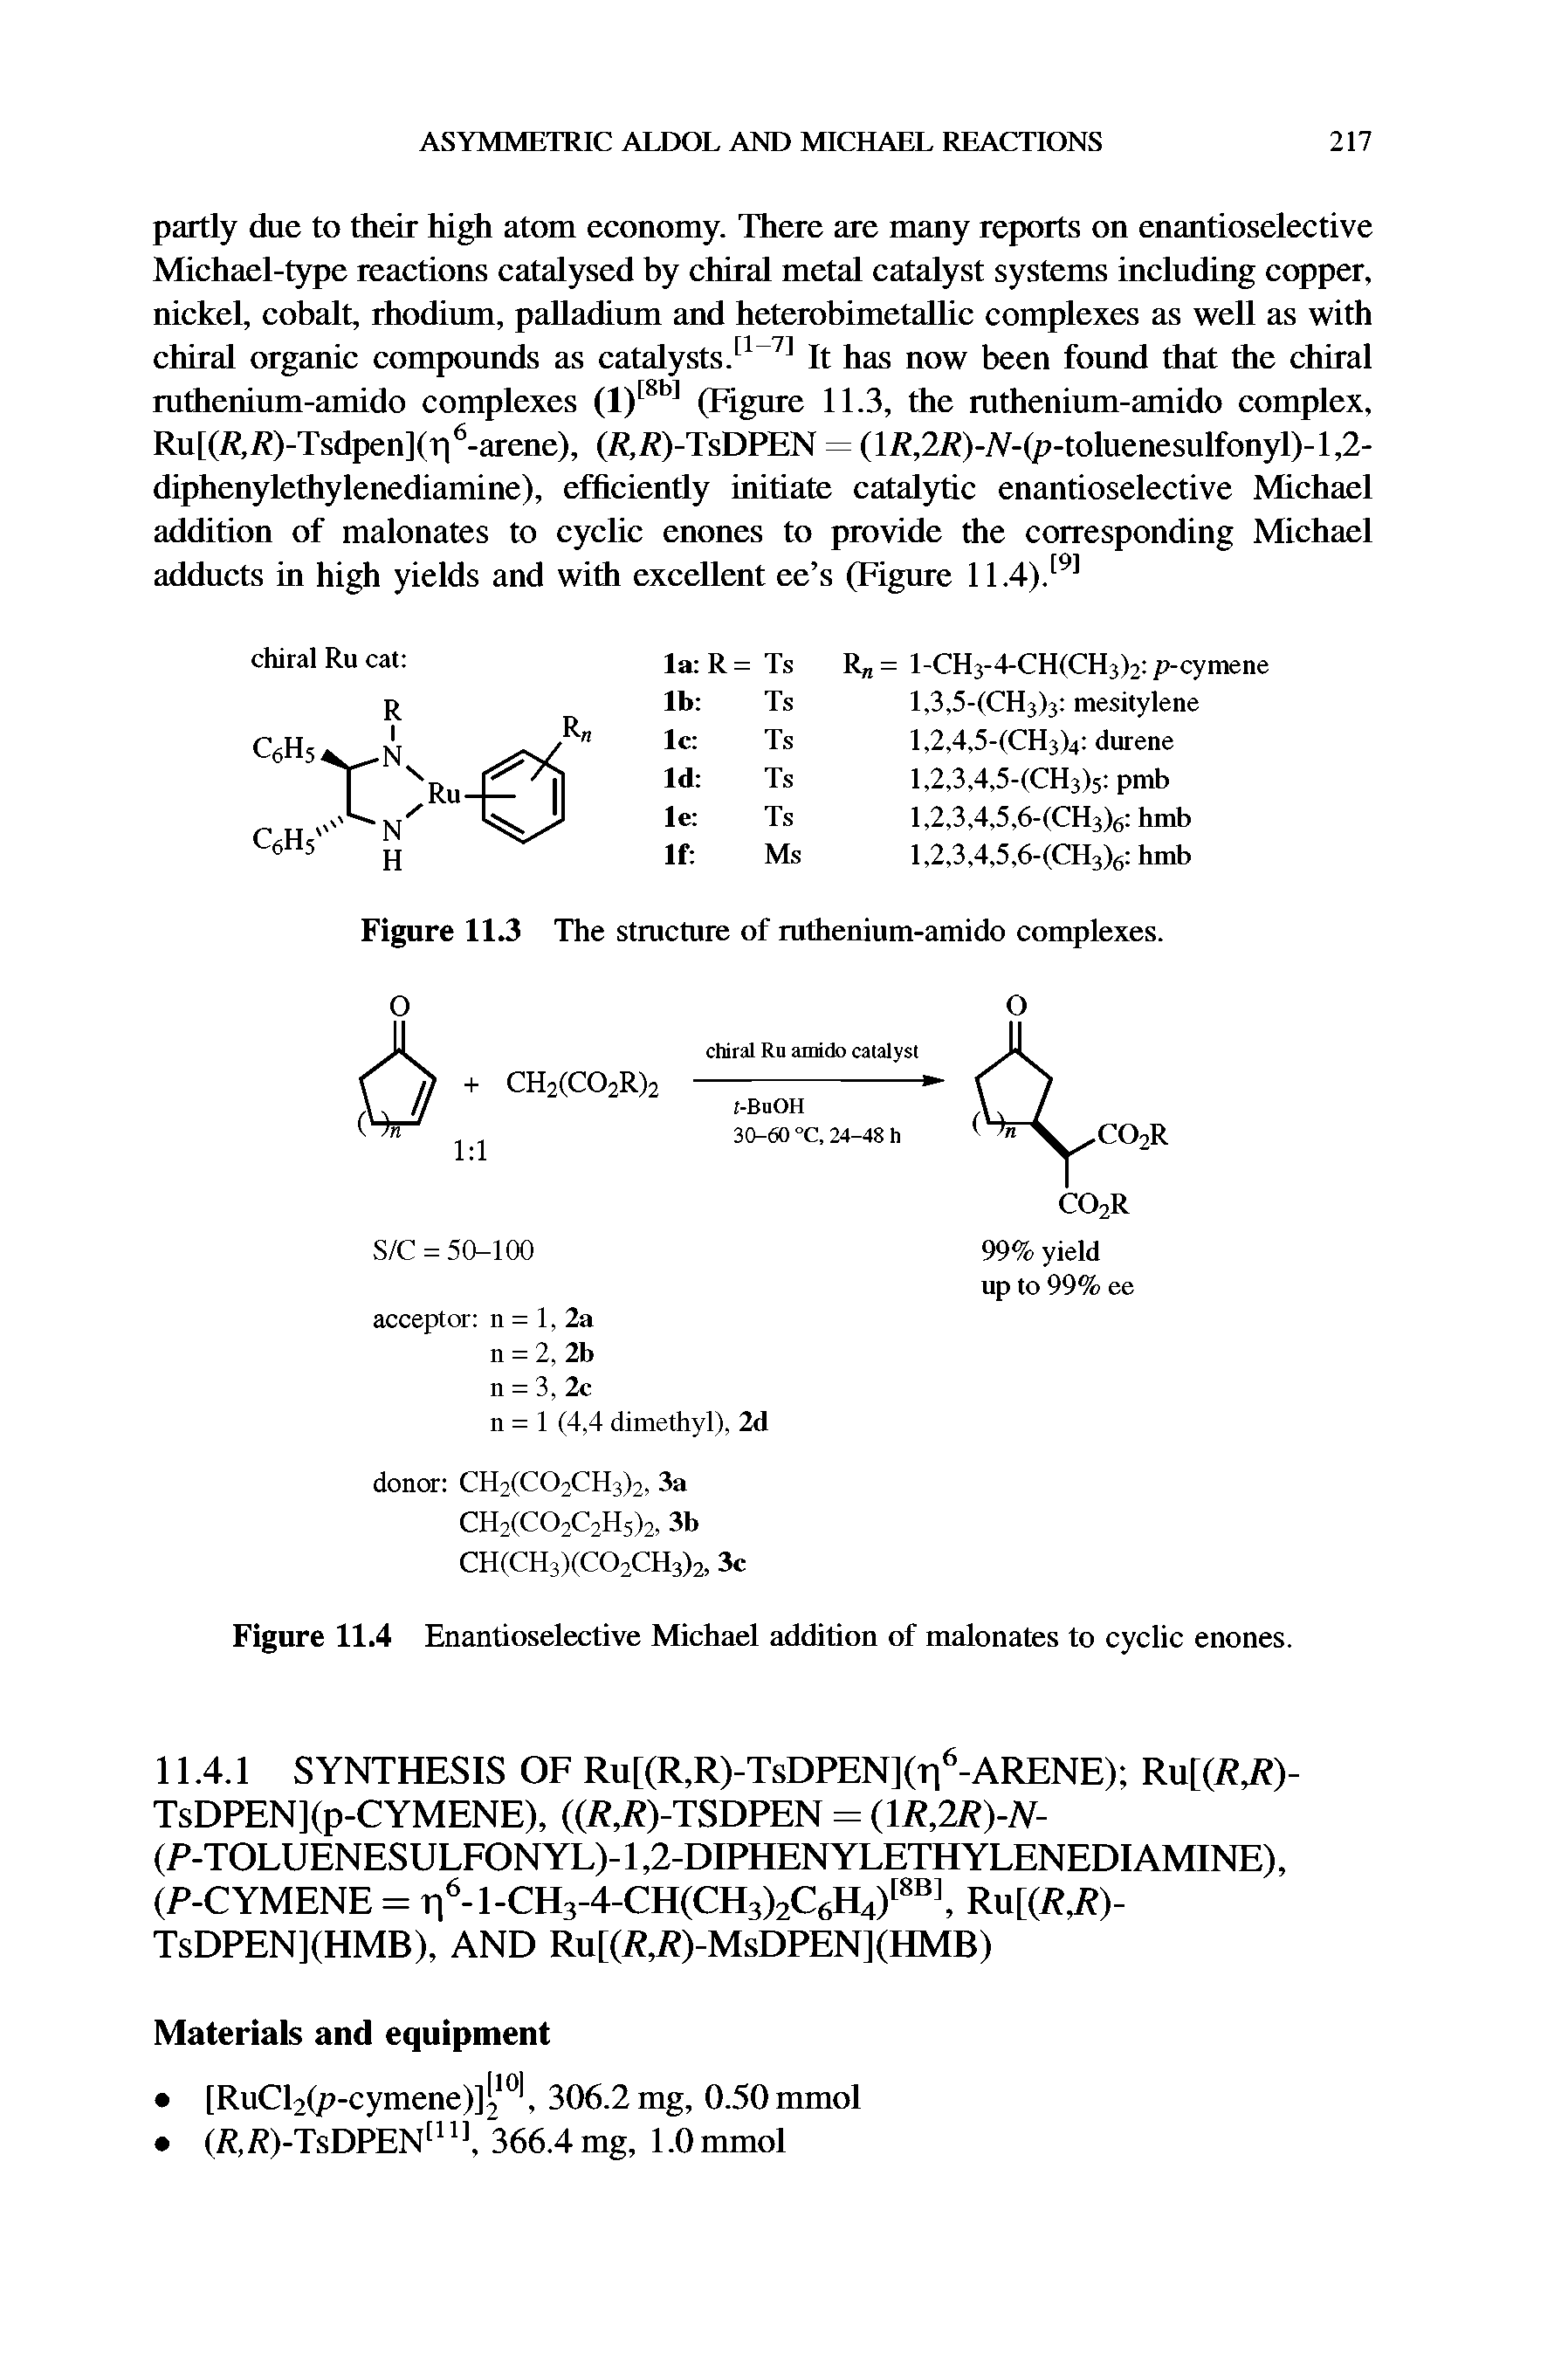 Figure 11.4 Enantioselective Michael addition of malonates to cyclic enones.